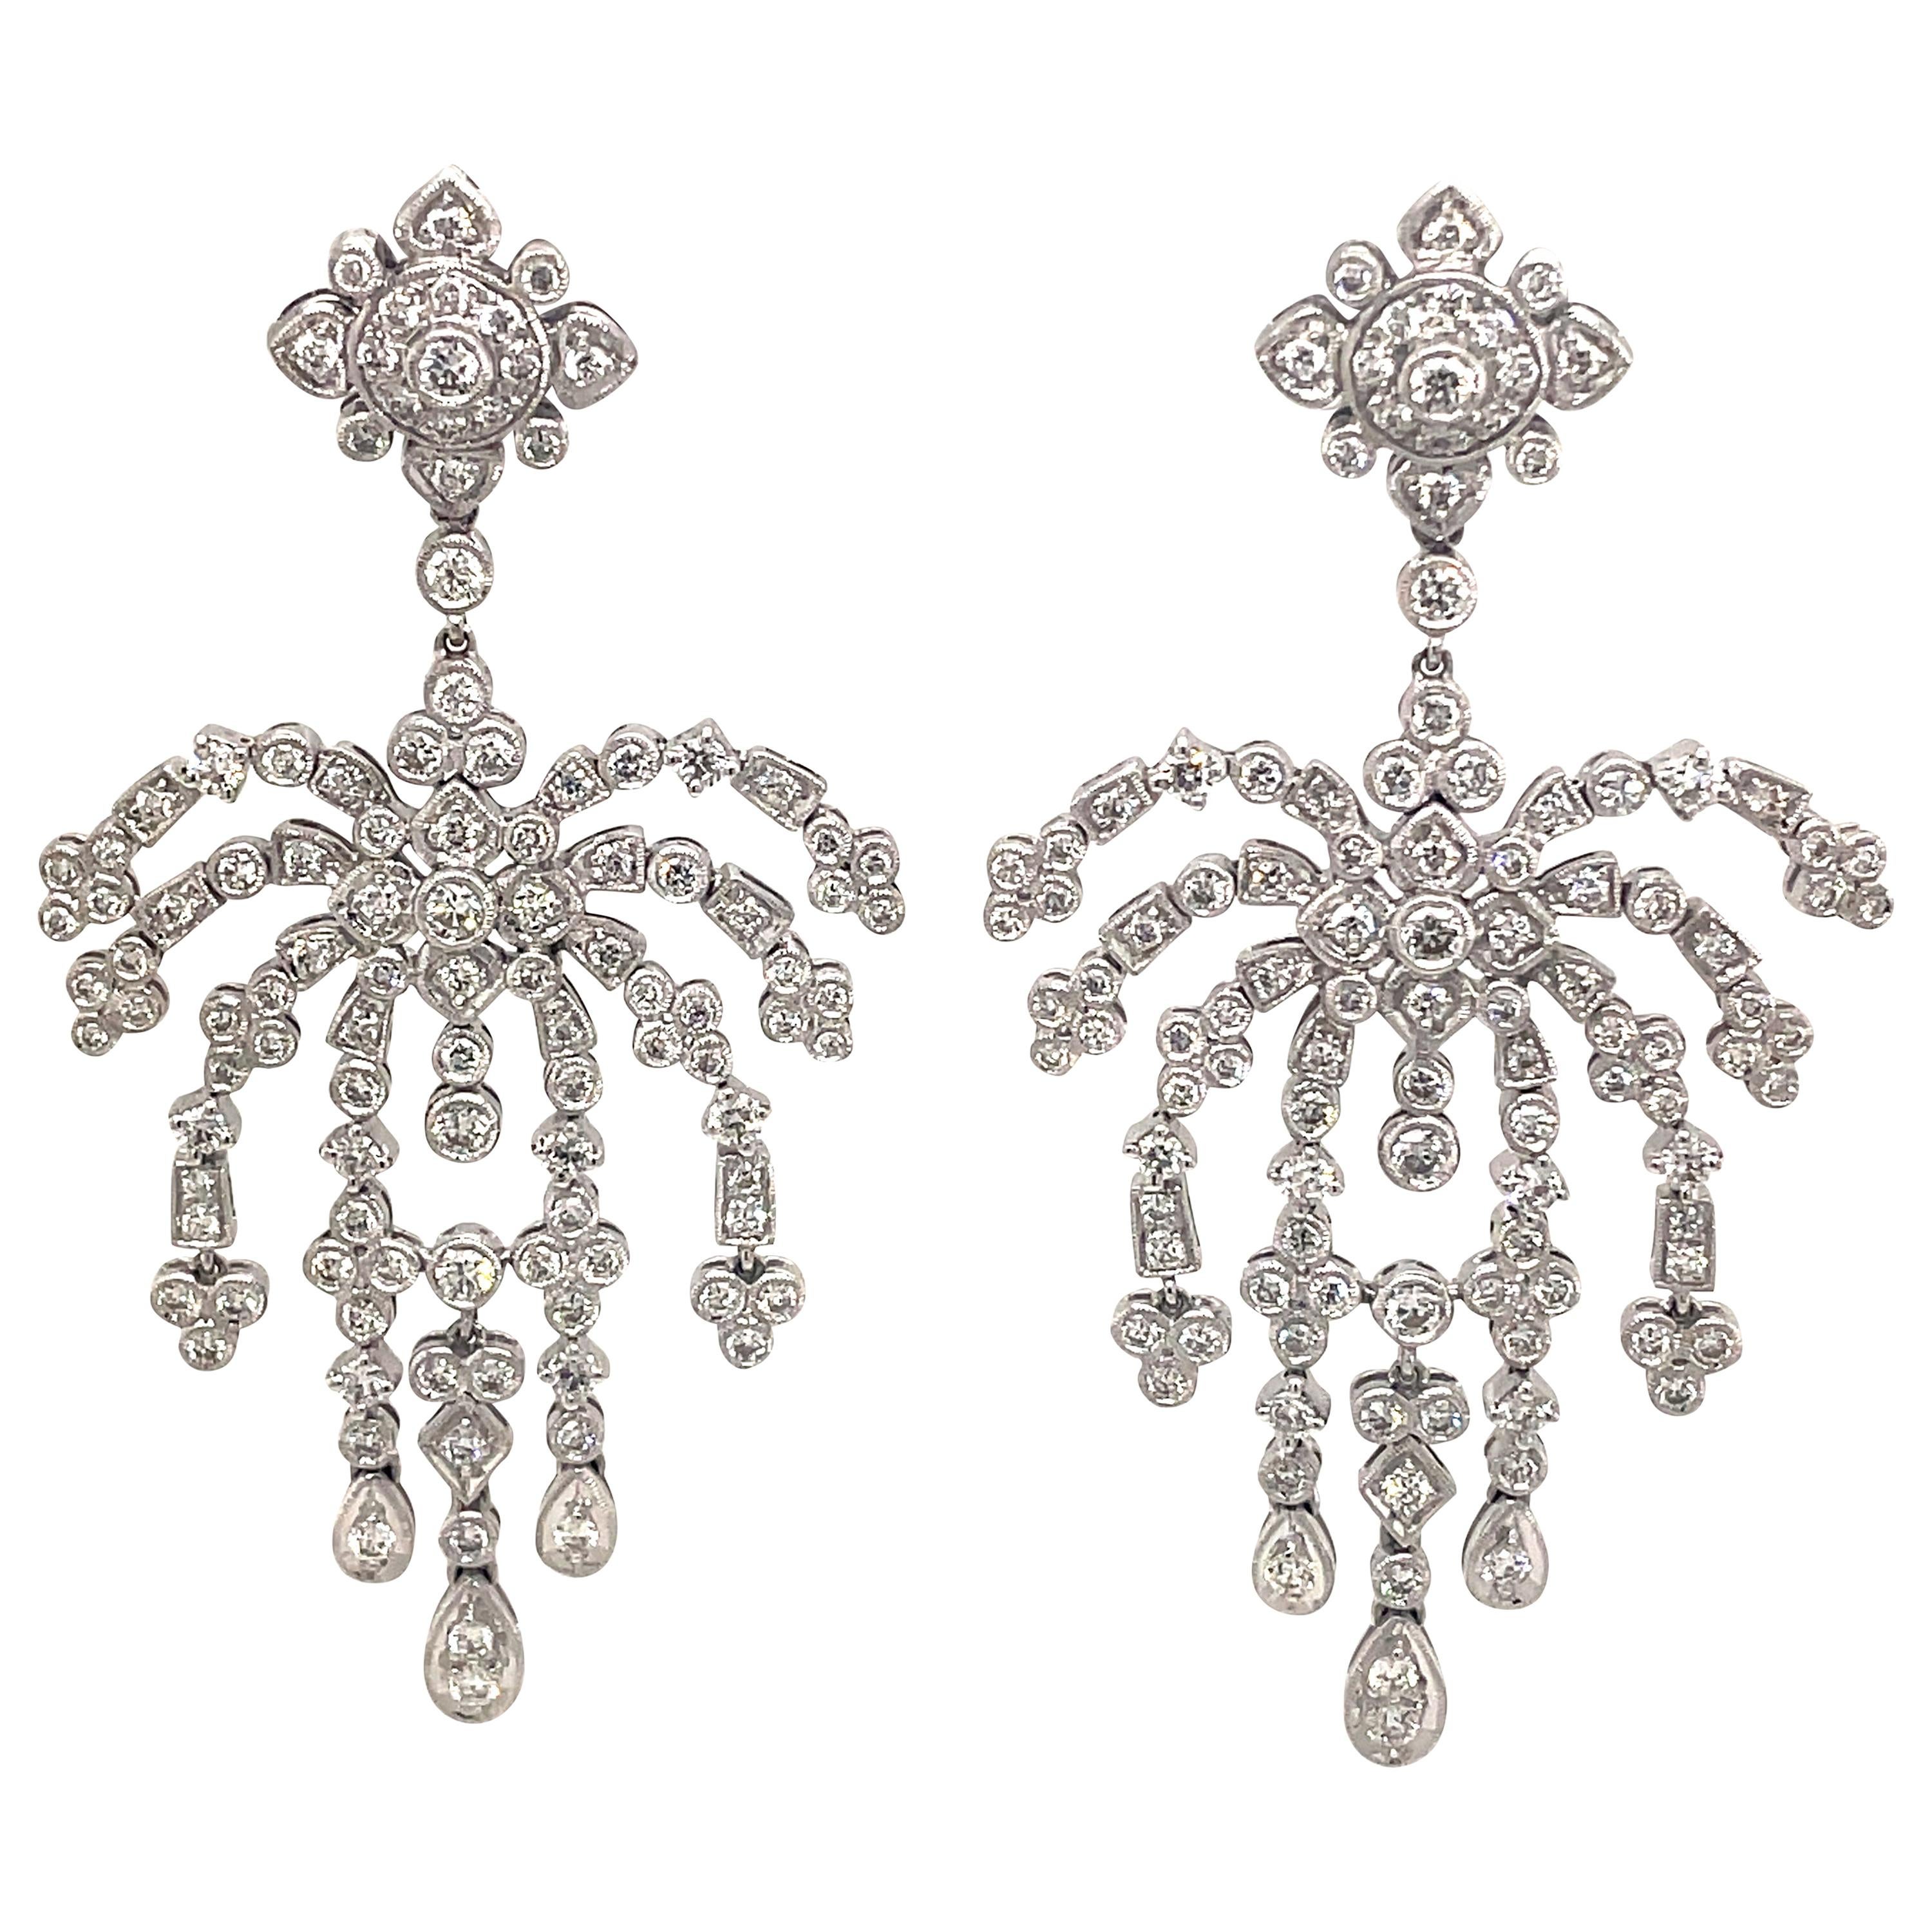 Edwardian Style 3.66ct Round Diamond Chandelier Earrings 18k White Gold For Sale